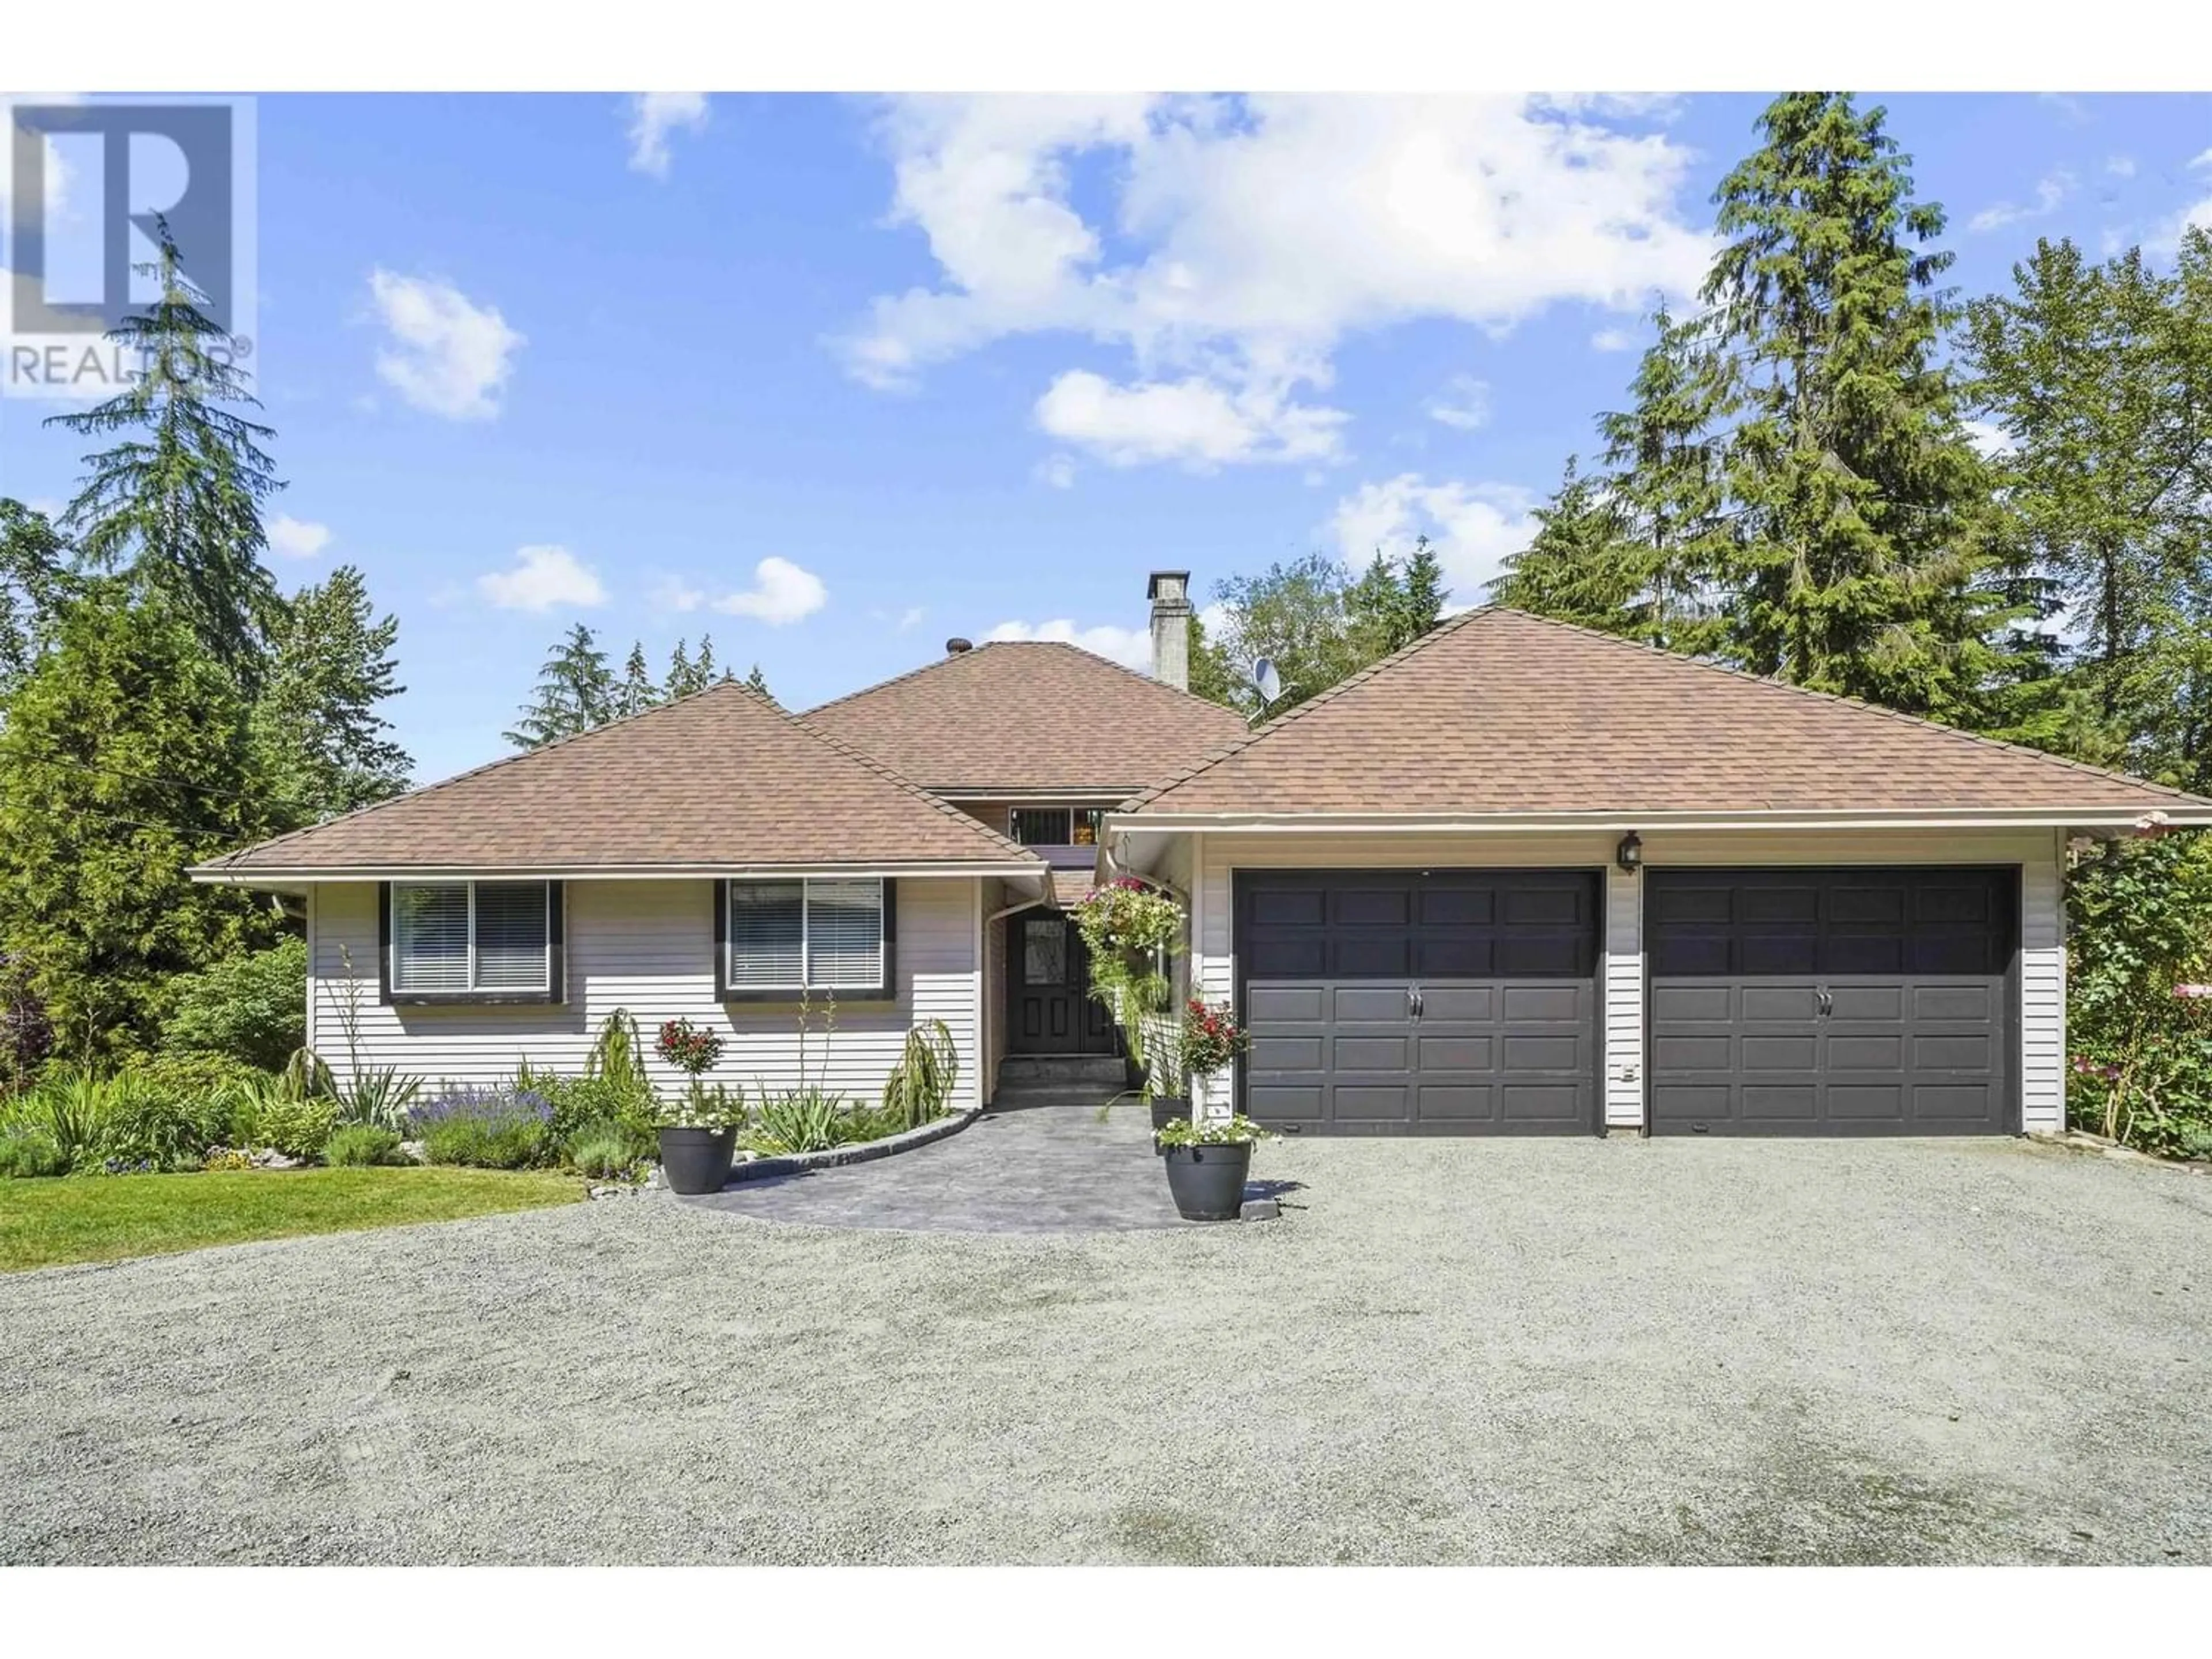 Frontside or backside of a home for 26493 CUNNINGHAM AVENUE, Maple Ridge British Columbia V2W1M8